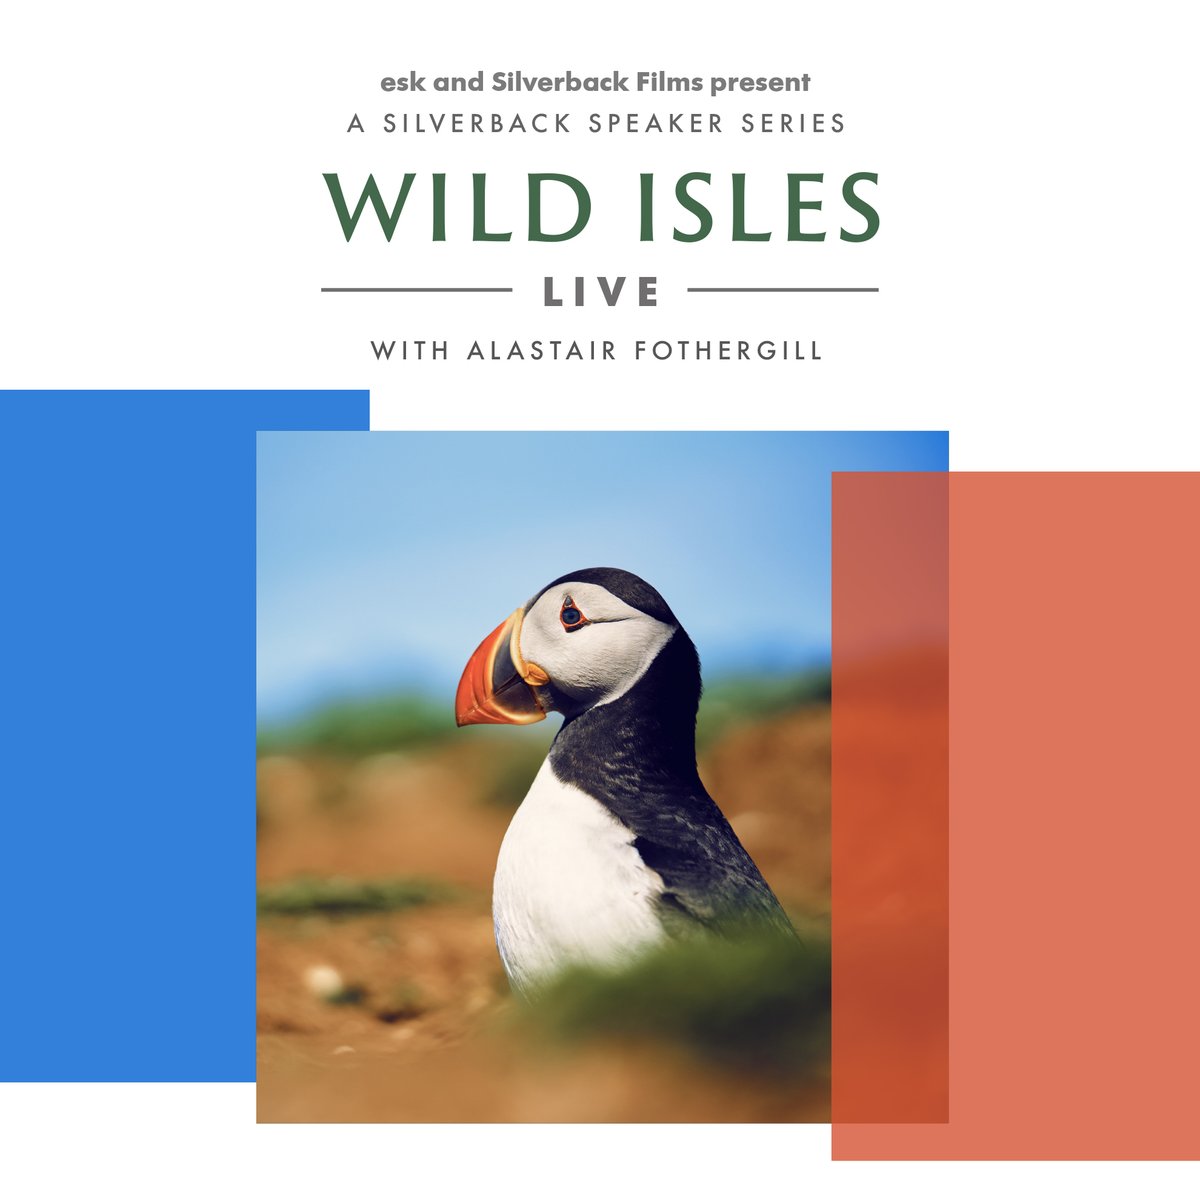 Wild Isles is going on tour! See the beauty of the British Isles at this big-screen talk, featuring highlights from the series, unseen footage, and insight from producer Alastair Fothergill. Tour dates in May across the UK! More info and tickets: wildisleslive.org